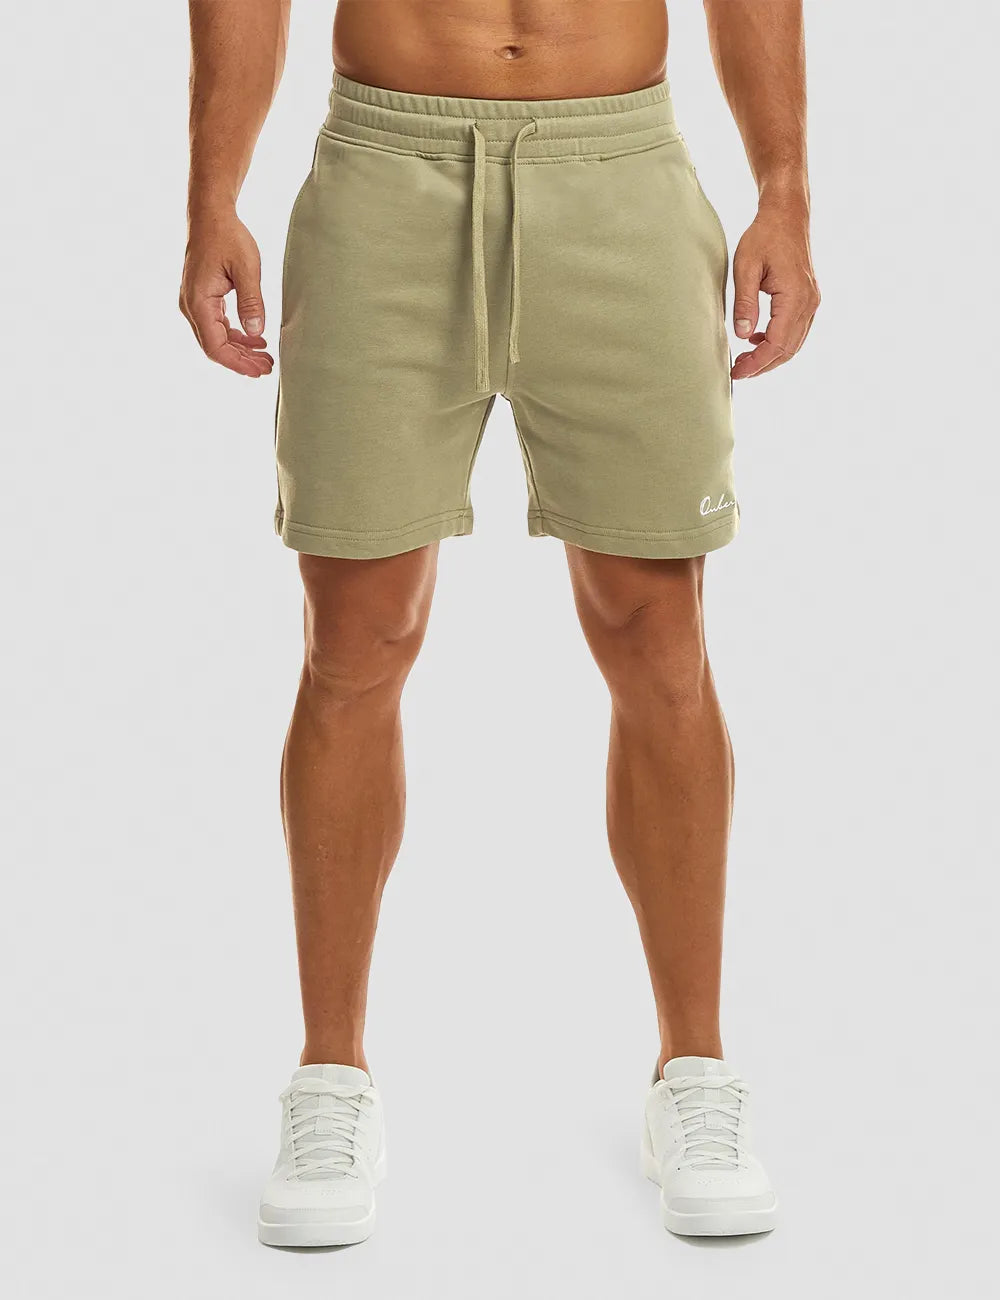 Cotton Steady State Short 6"